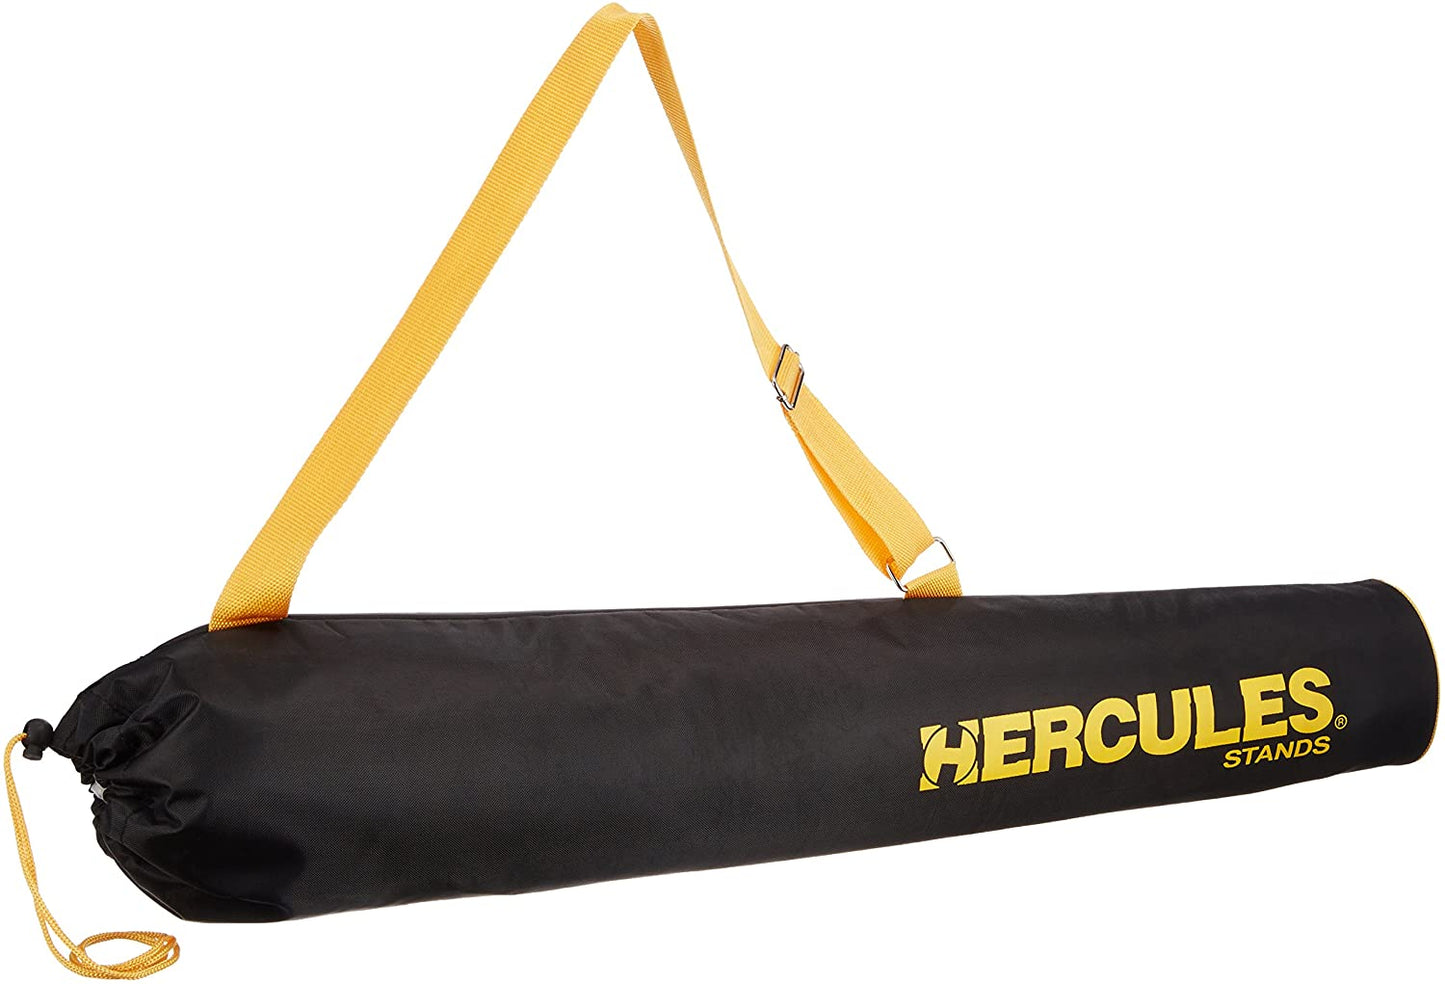 Hercules Stands GSB001 Carrying Bag for Guitar Stands